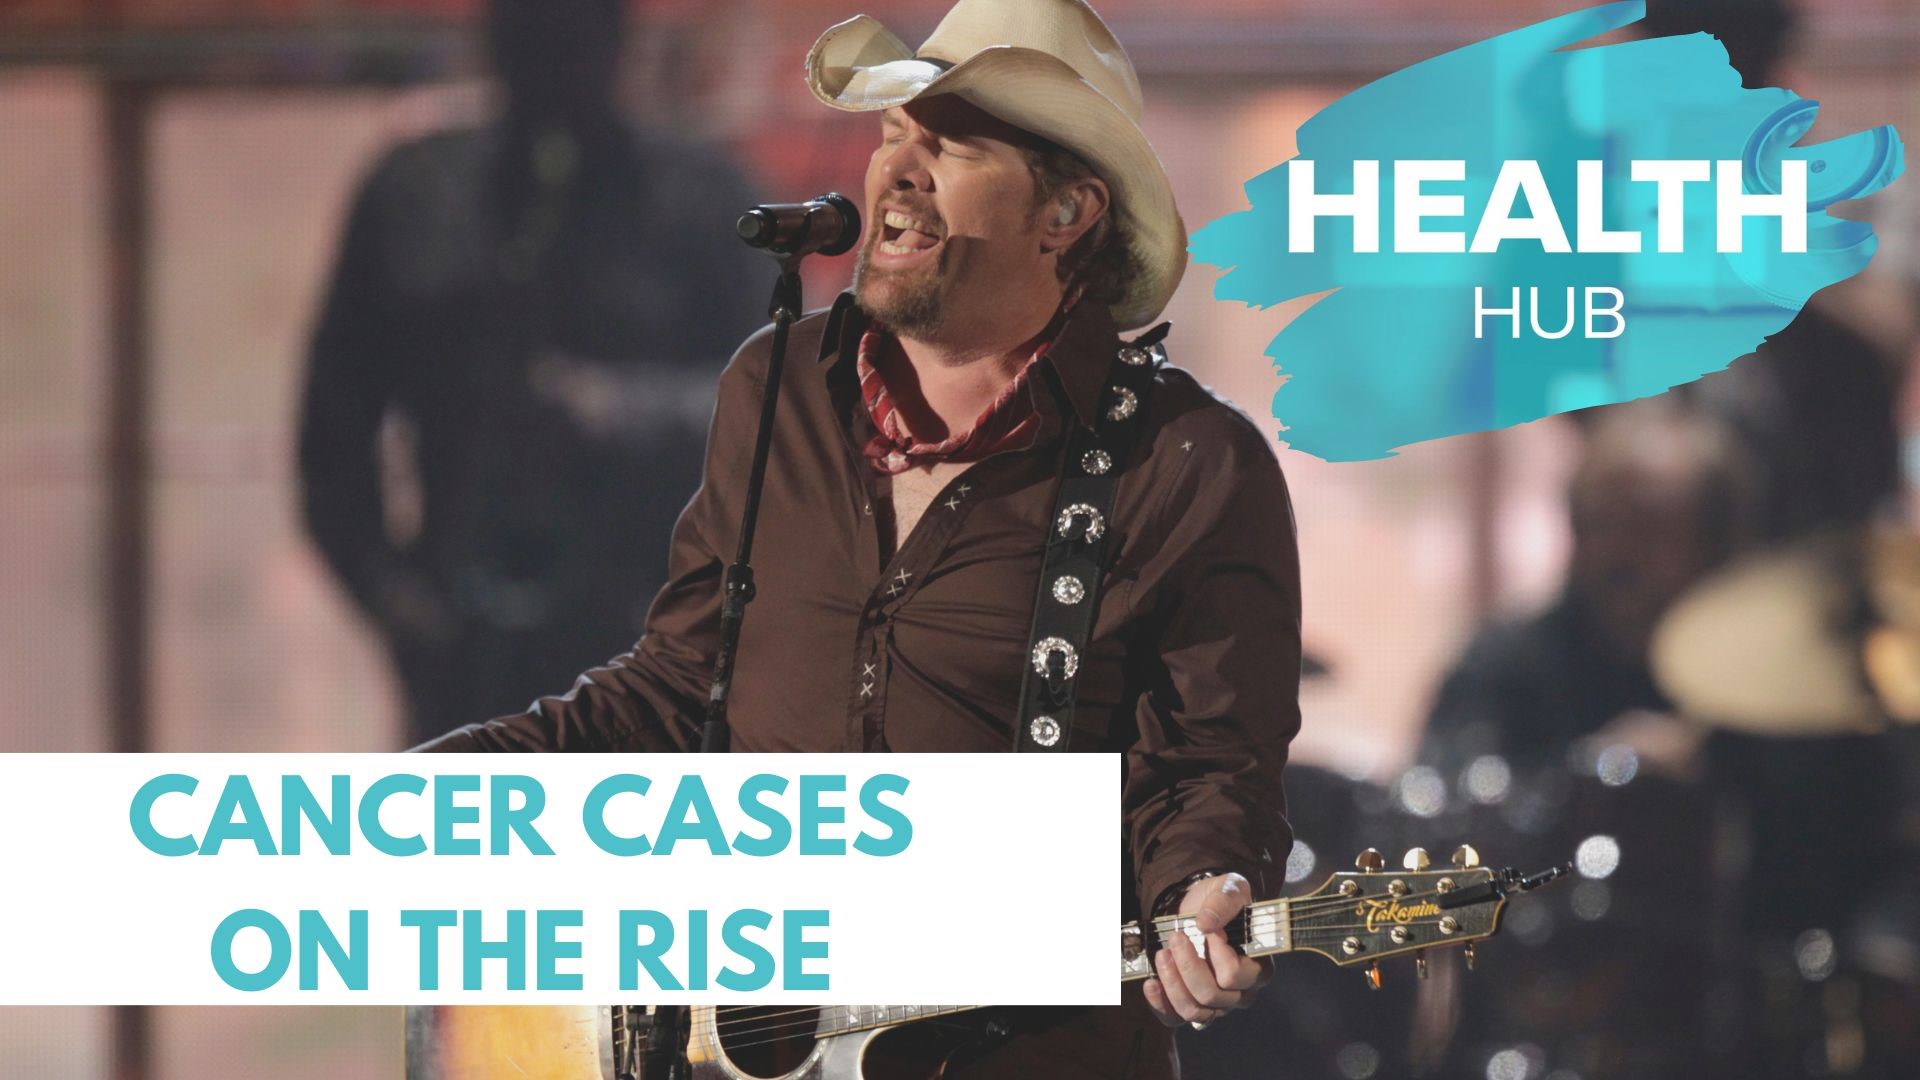 Cancer cases, especially in adults younger than 50, are on the rise. Tips to help prevent cancer, plus a look at stomach cancer after Toby Keith's death.